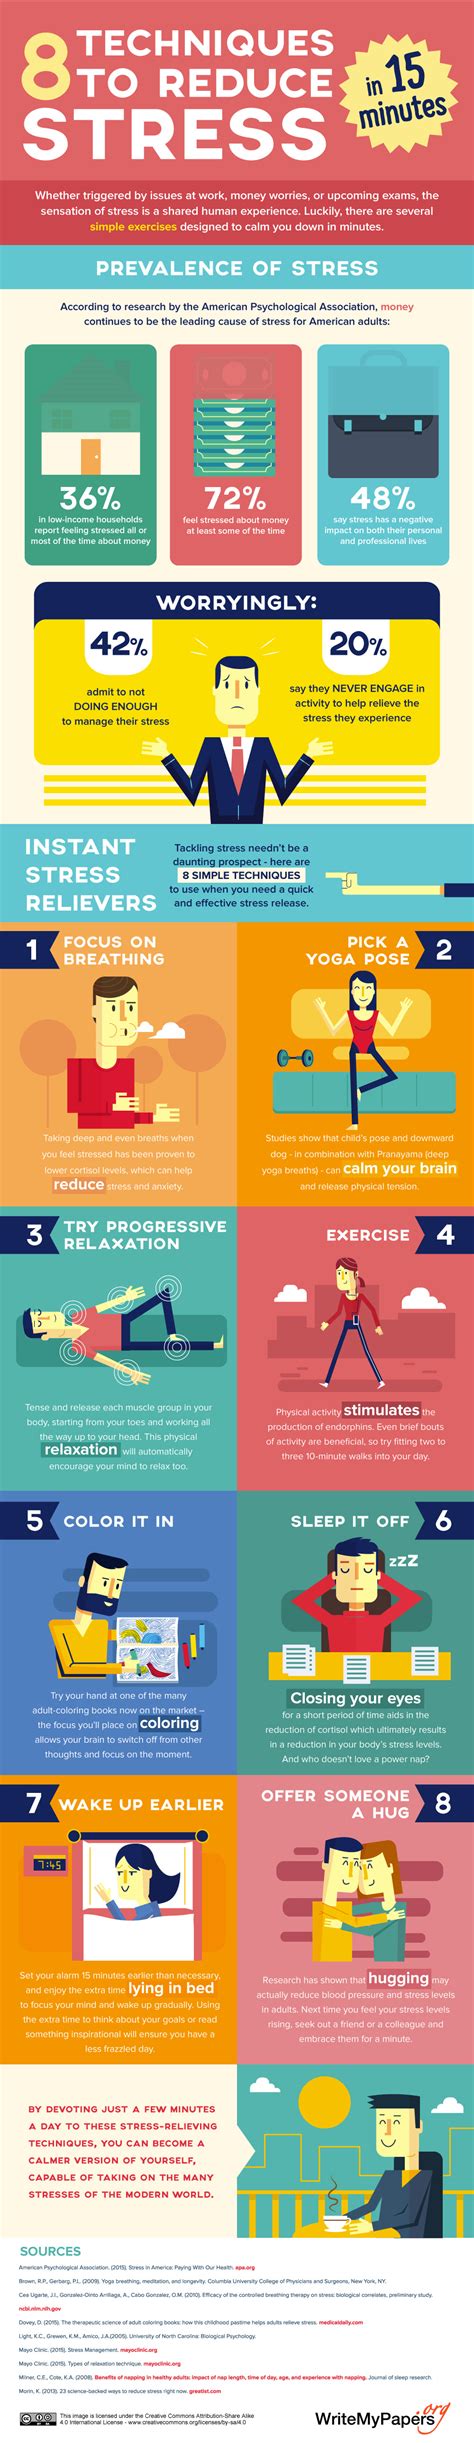 8 techniques to reduce stress in 15 minutes infographic